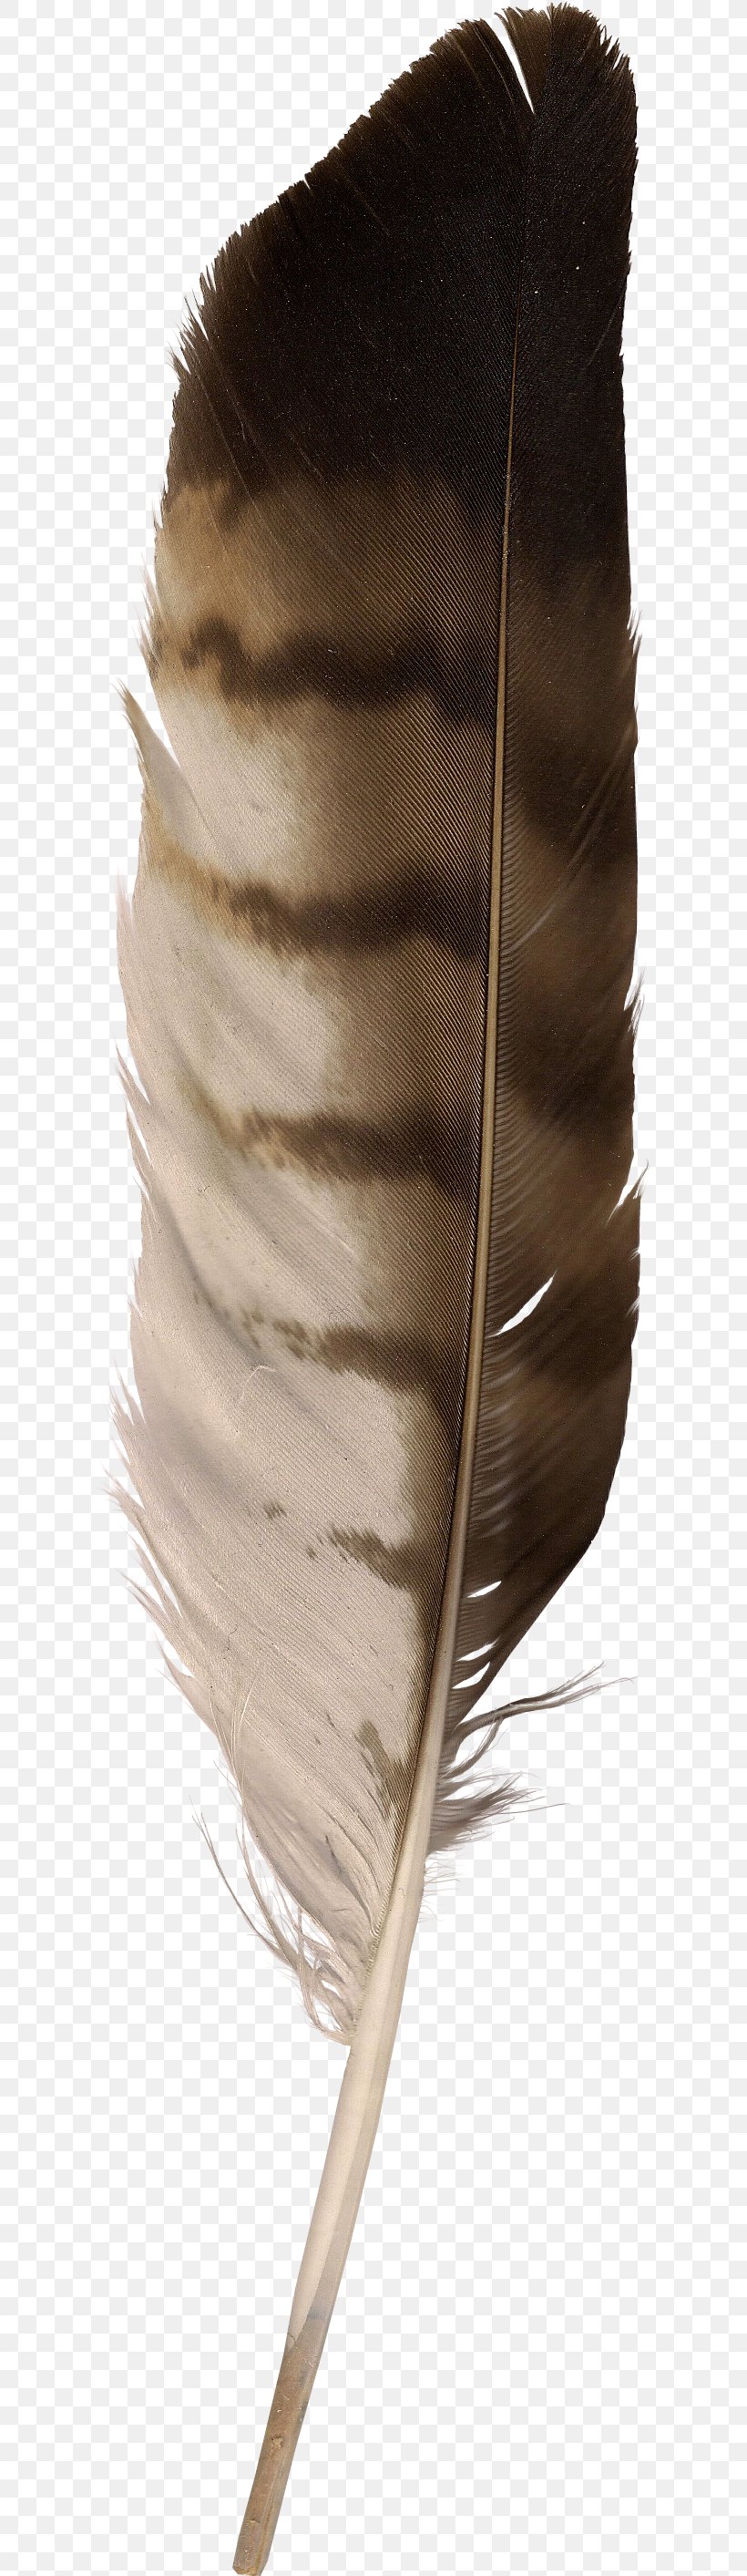 Eagle Feather Law Goose, PNG, 608x2826px, Feather, Animal, Beak, Eagle, Eagle Feather Law Download Free